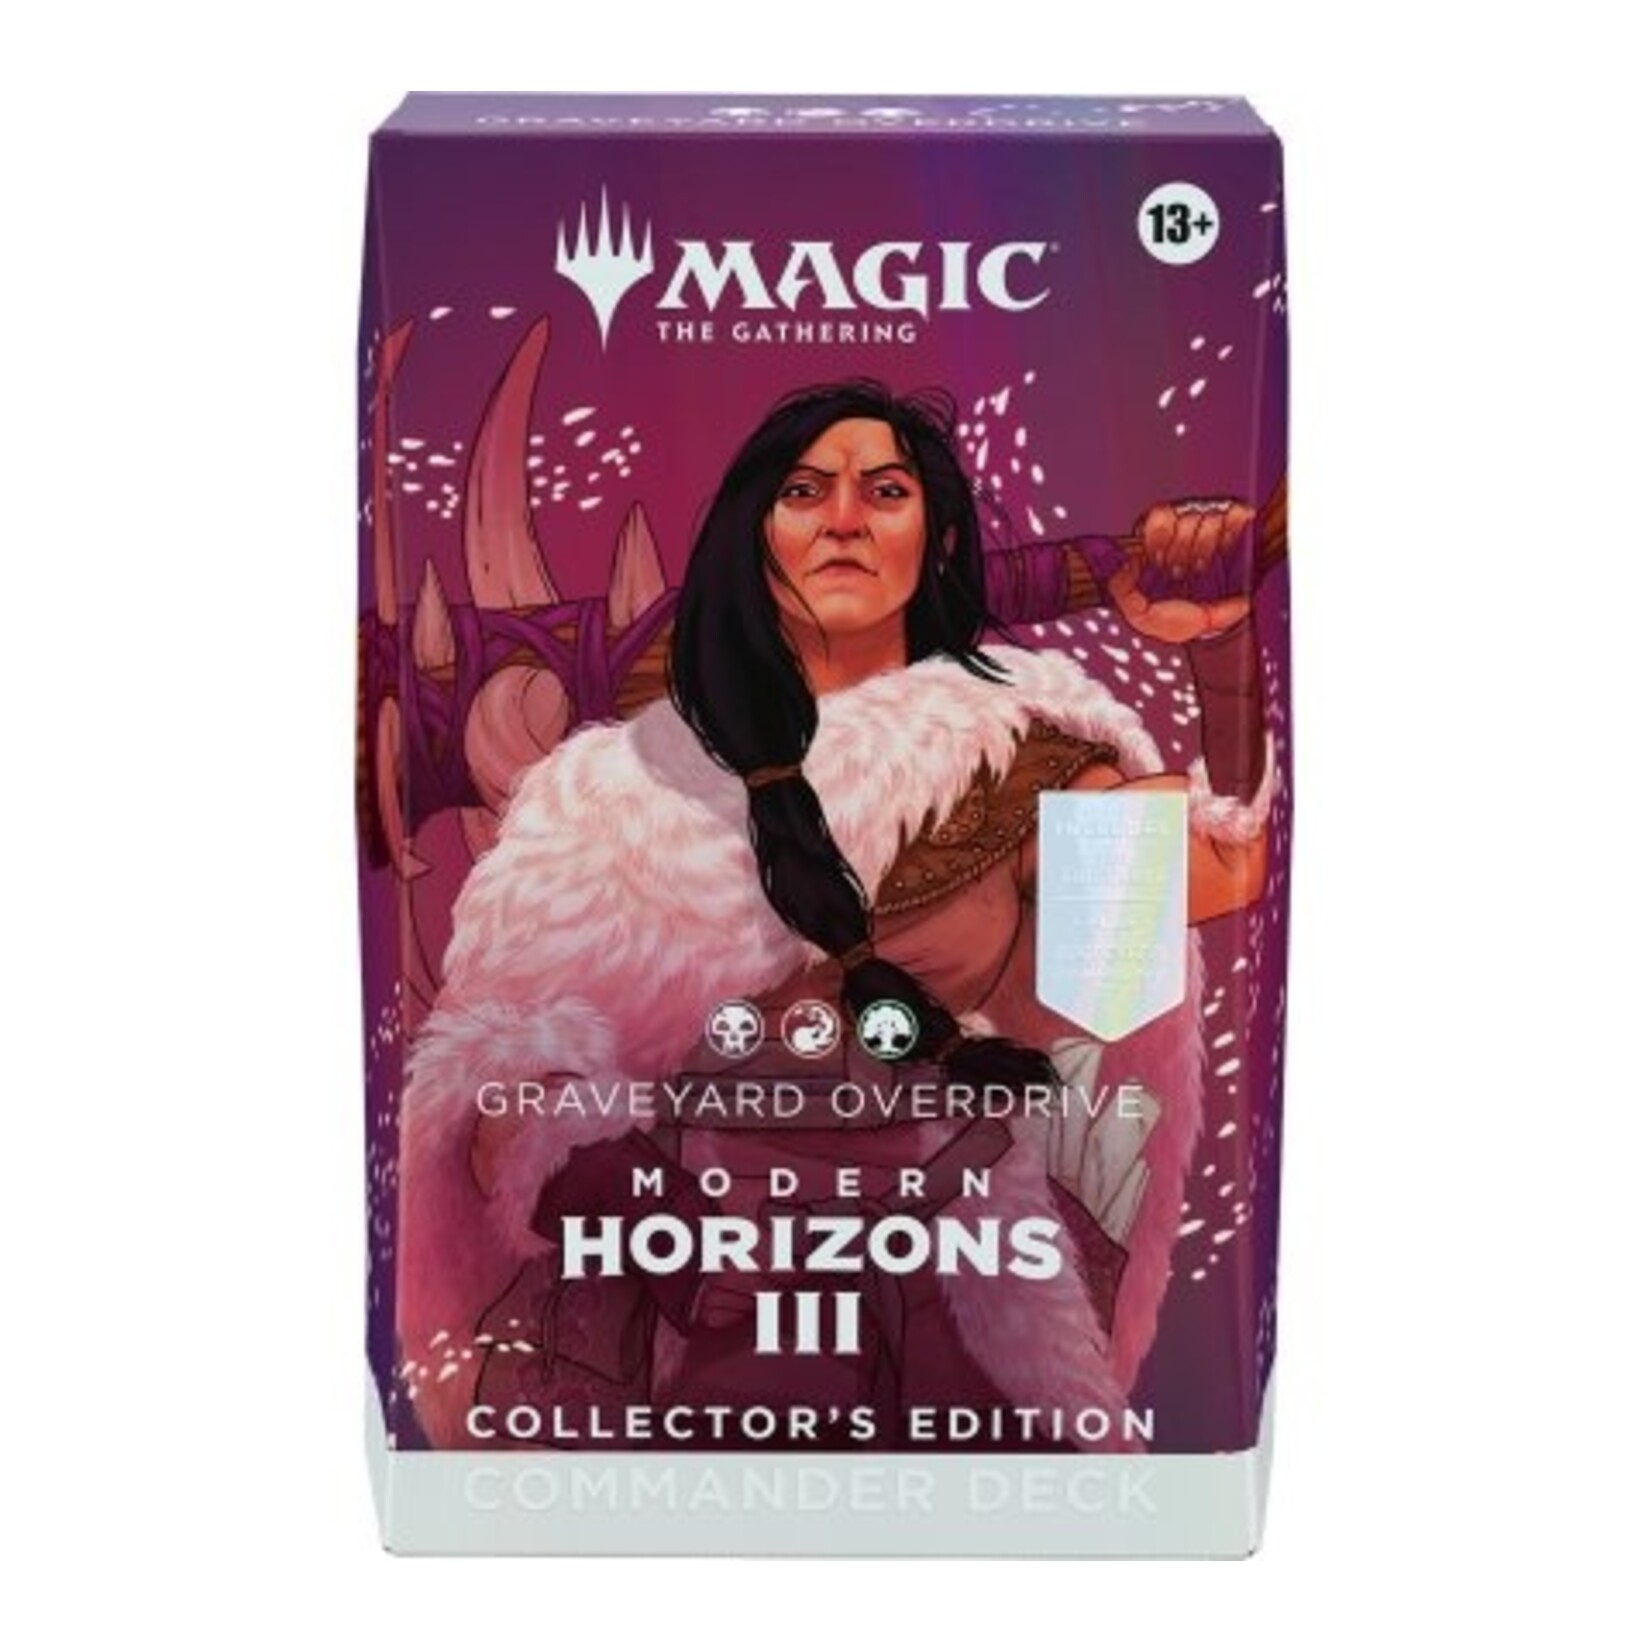 Magic: the Gathering - Modern Horizons 3 Collector's Edition Commander Deck: Graveyard Overdrive